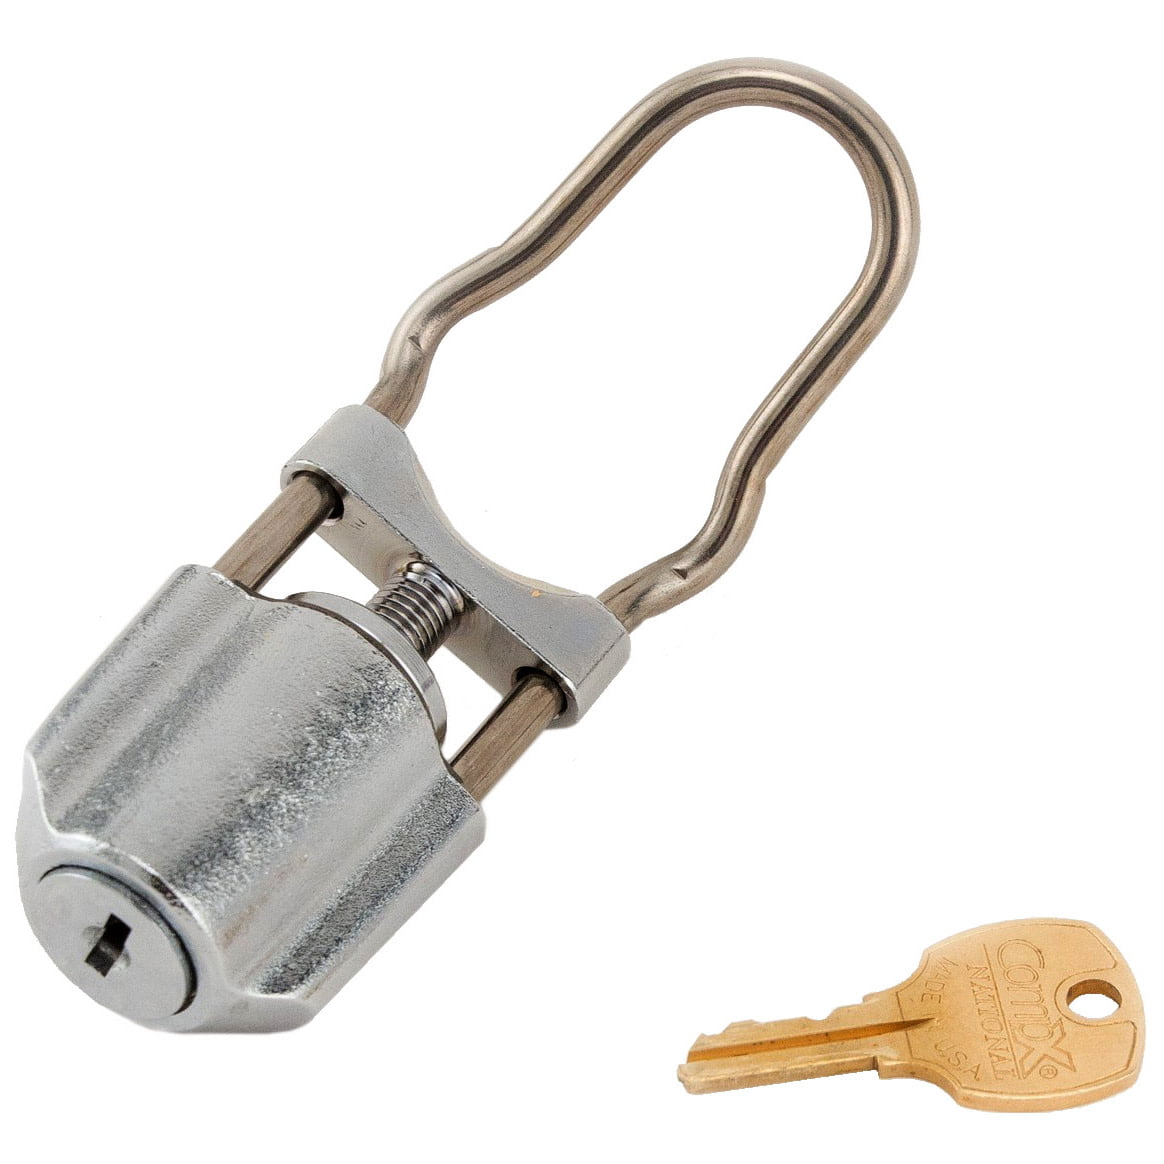 Perlick 308-40 Stainless Steel Beer Faucet Lock for 600 Series Faucets for sale online 